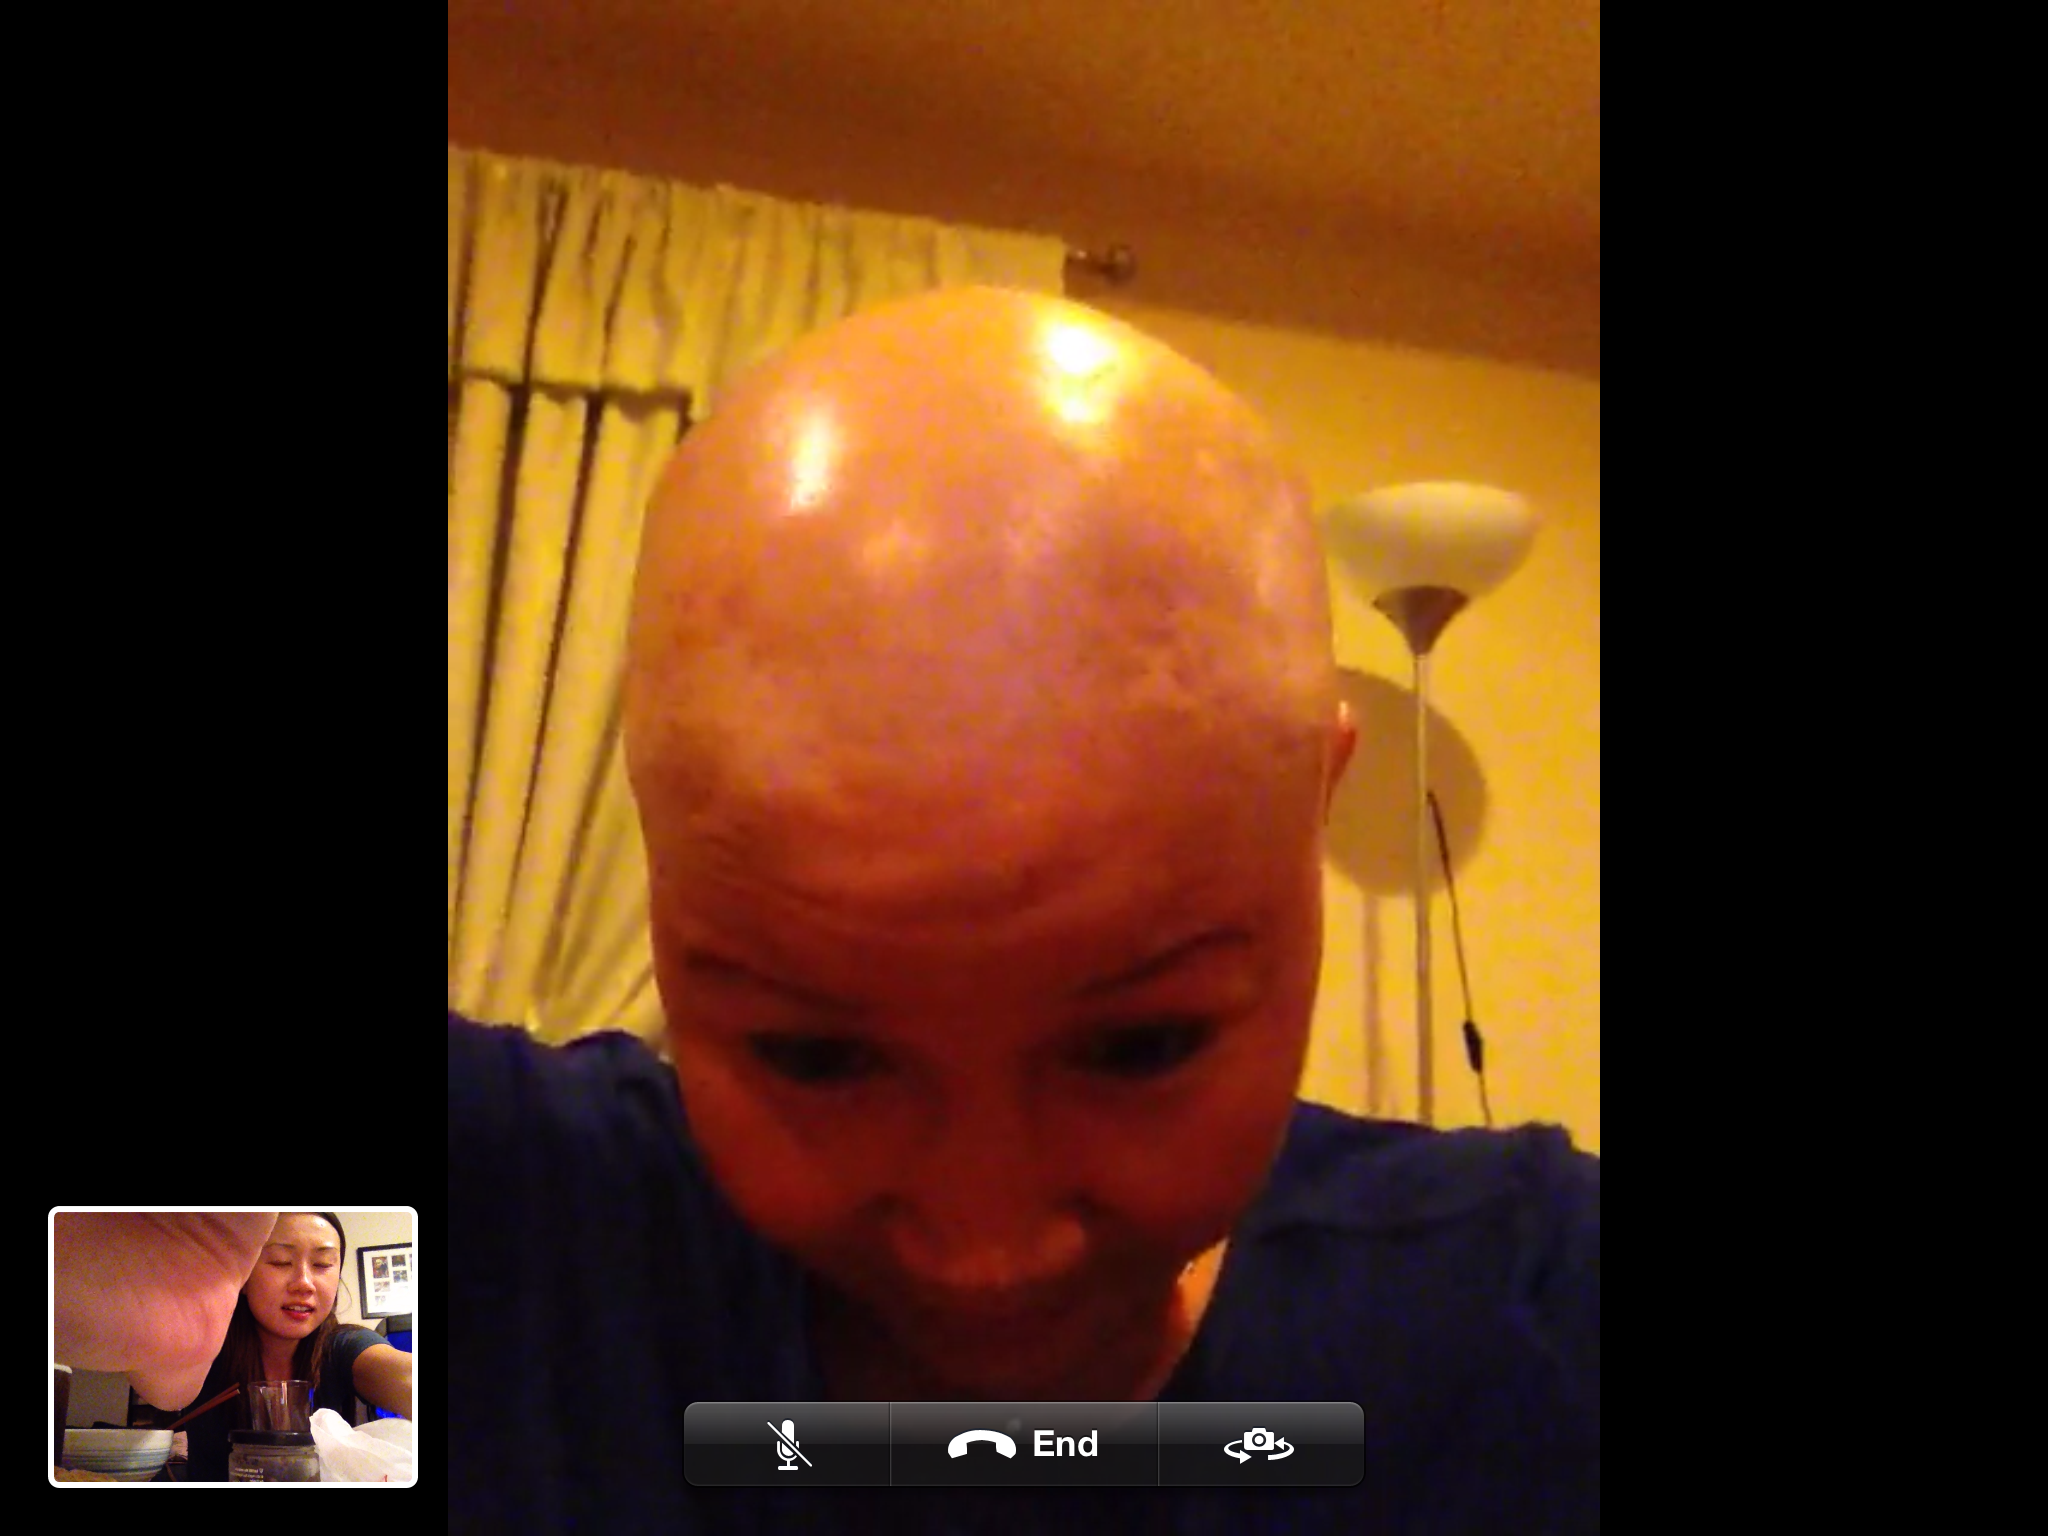 Shaved her head with razor